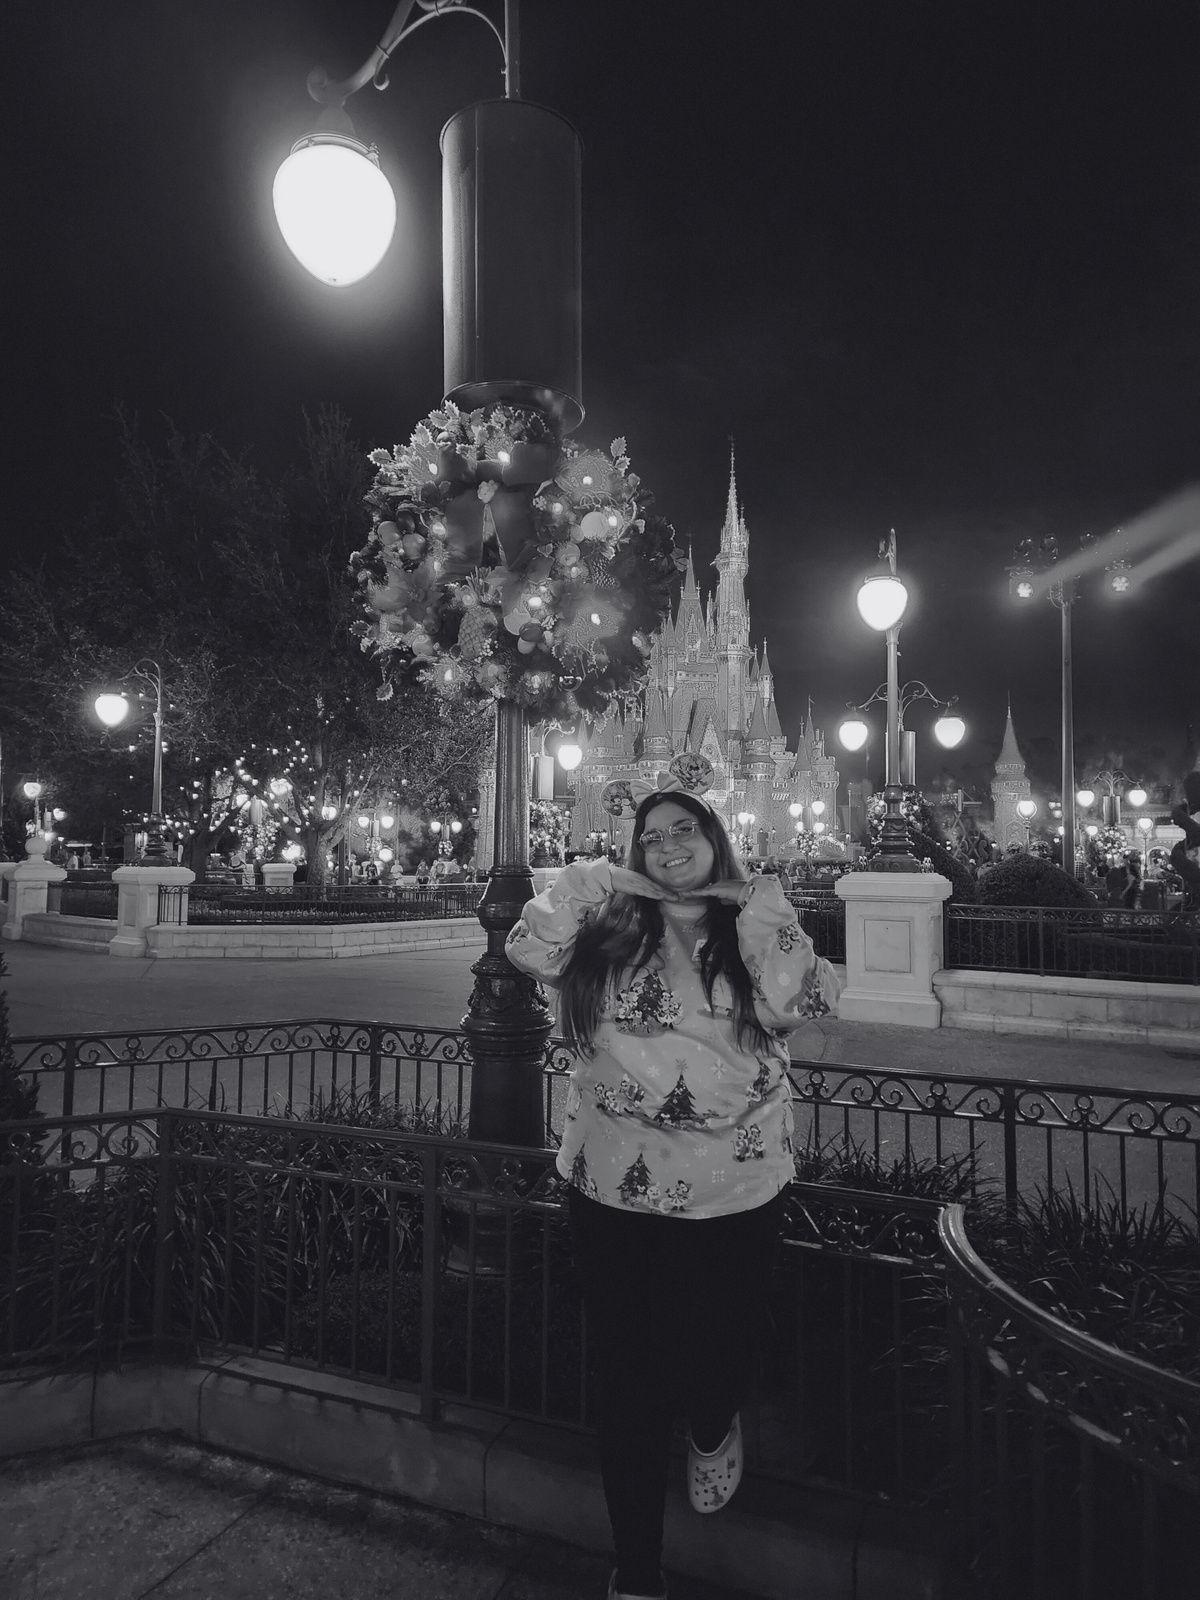 a photo of a person posing in front of the Cinderella Castle.